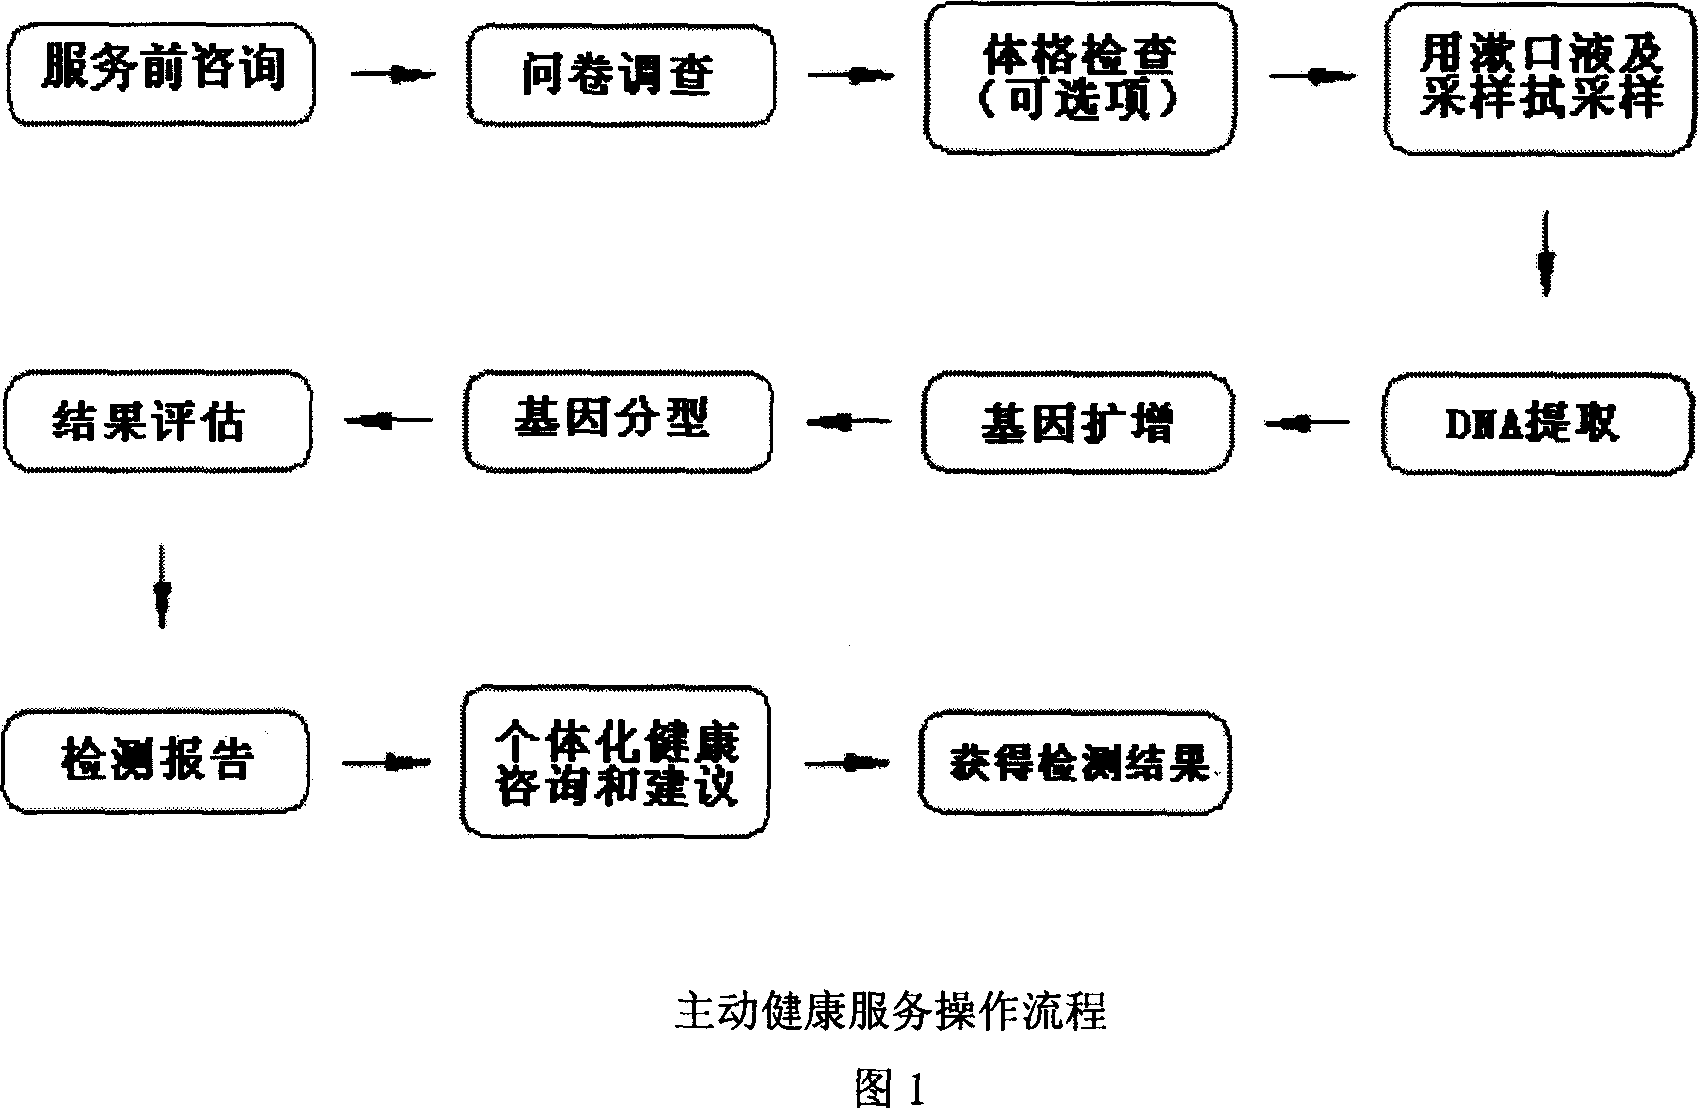 Service system and method by using technique of gene detection to provide active health service